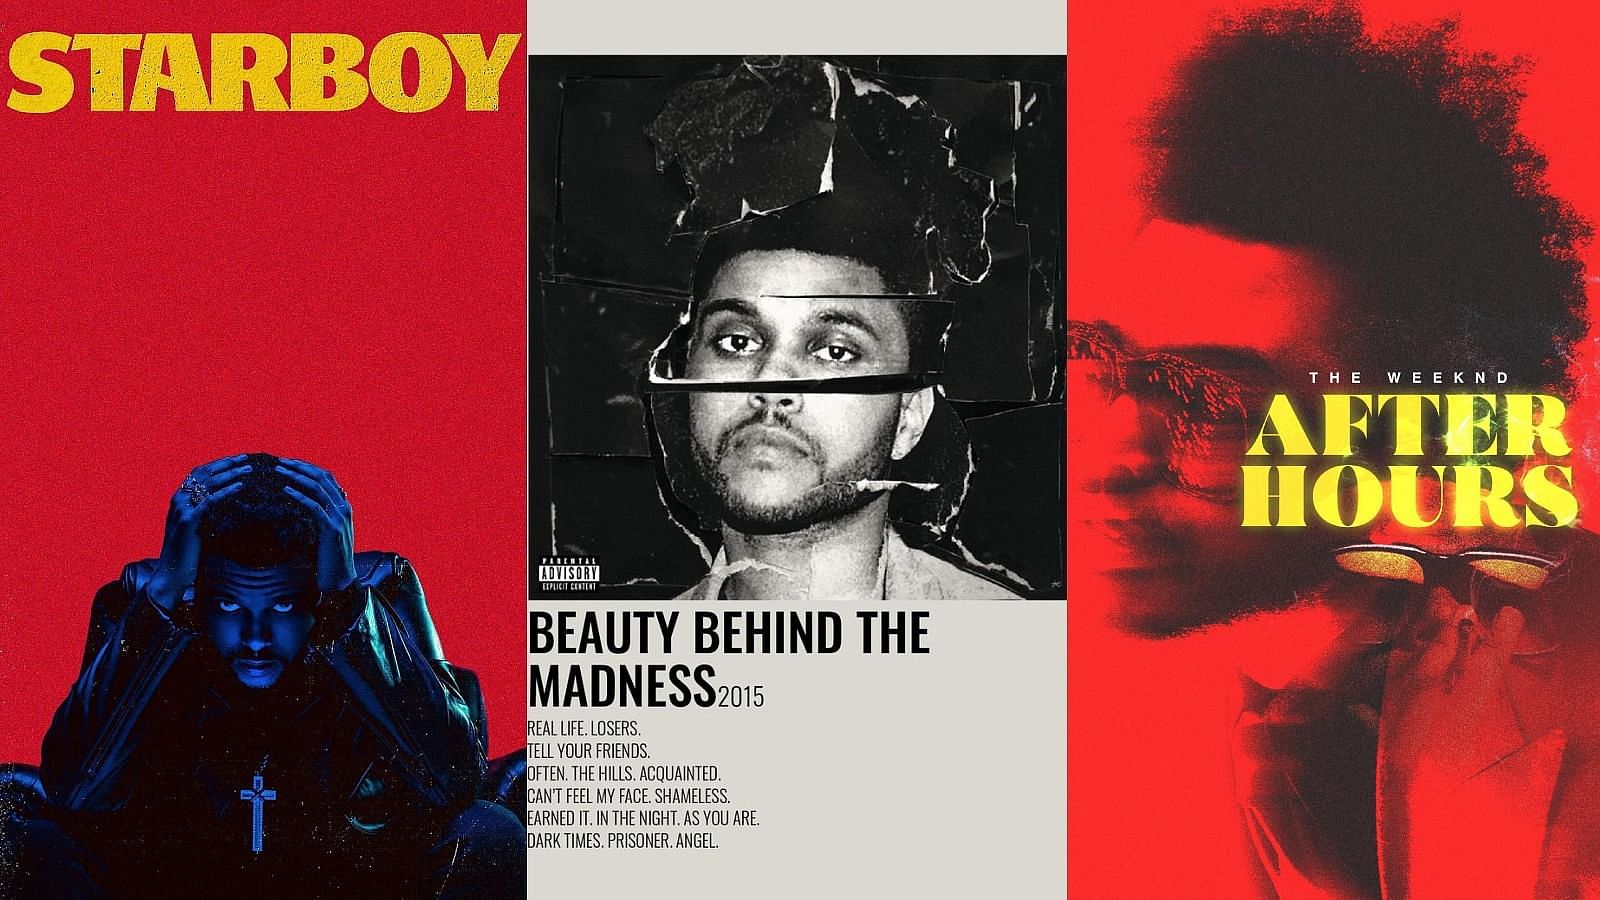 The Weeknd's best albums posters